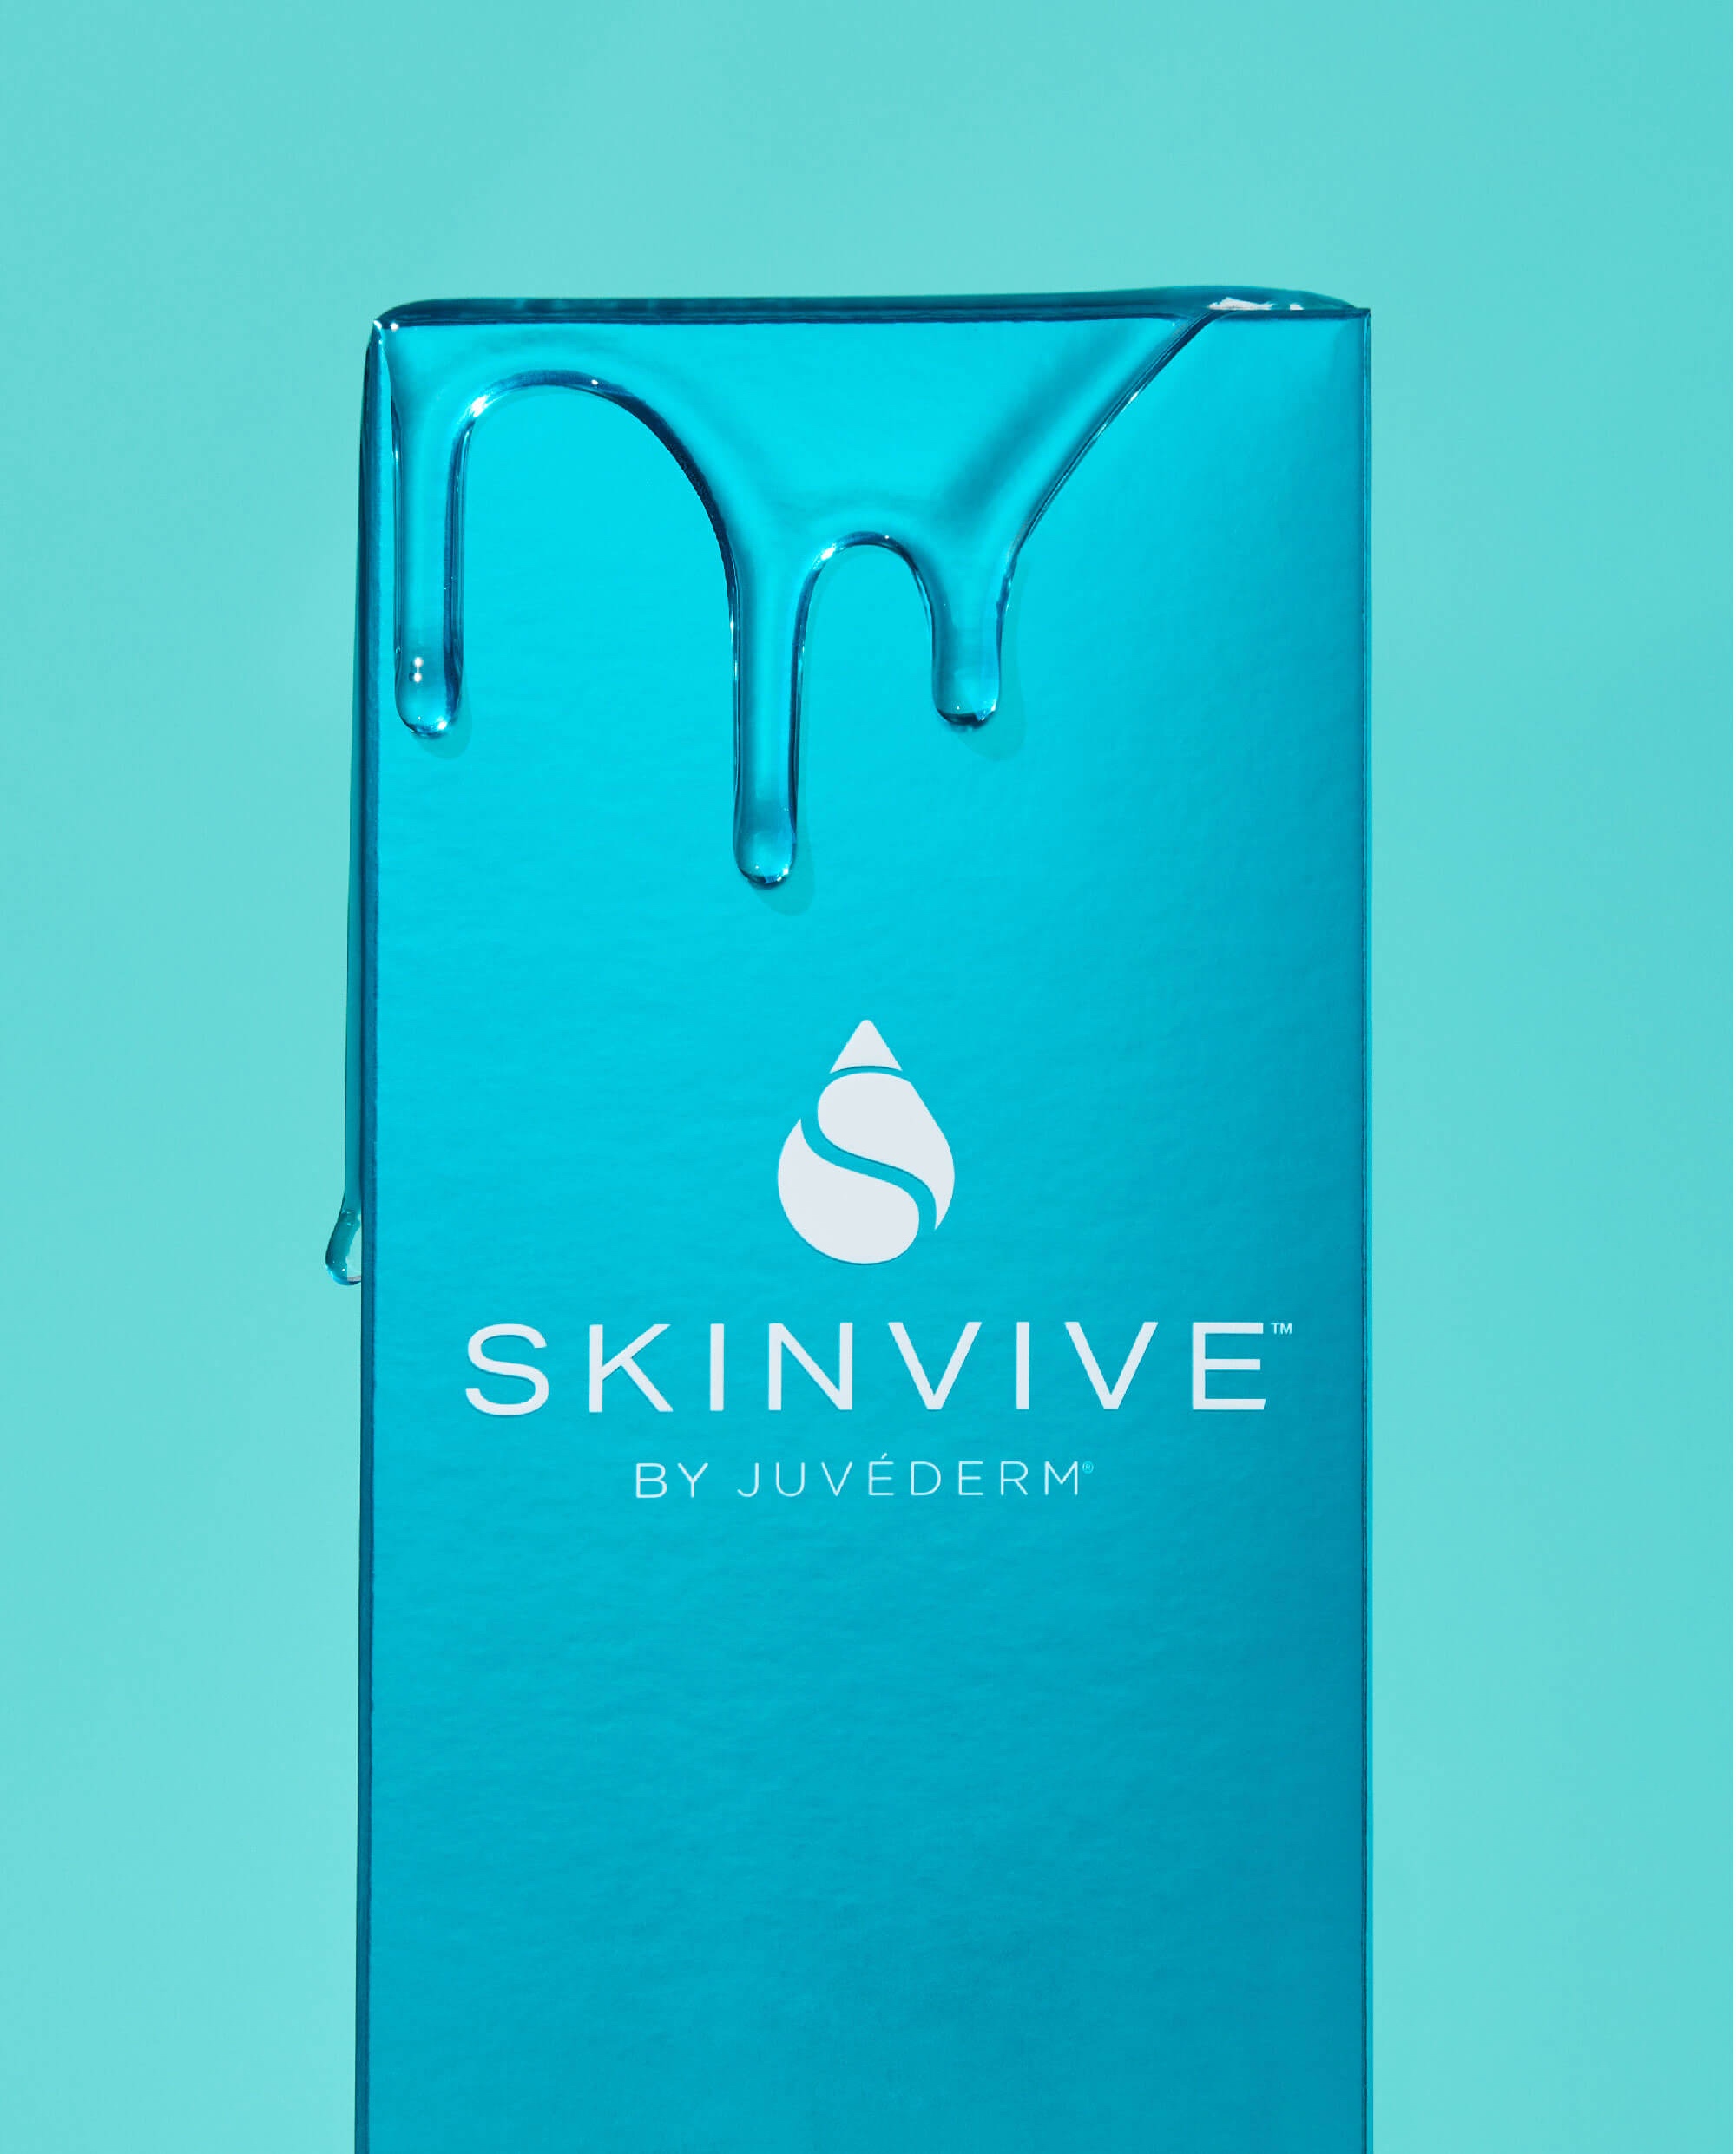 SkinVive – Keep Reading if you want GLOWING skin